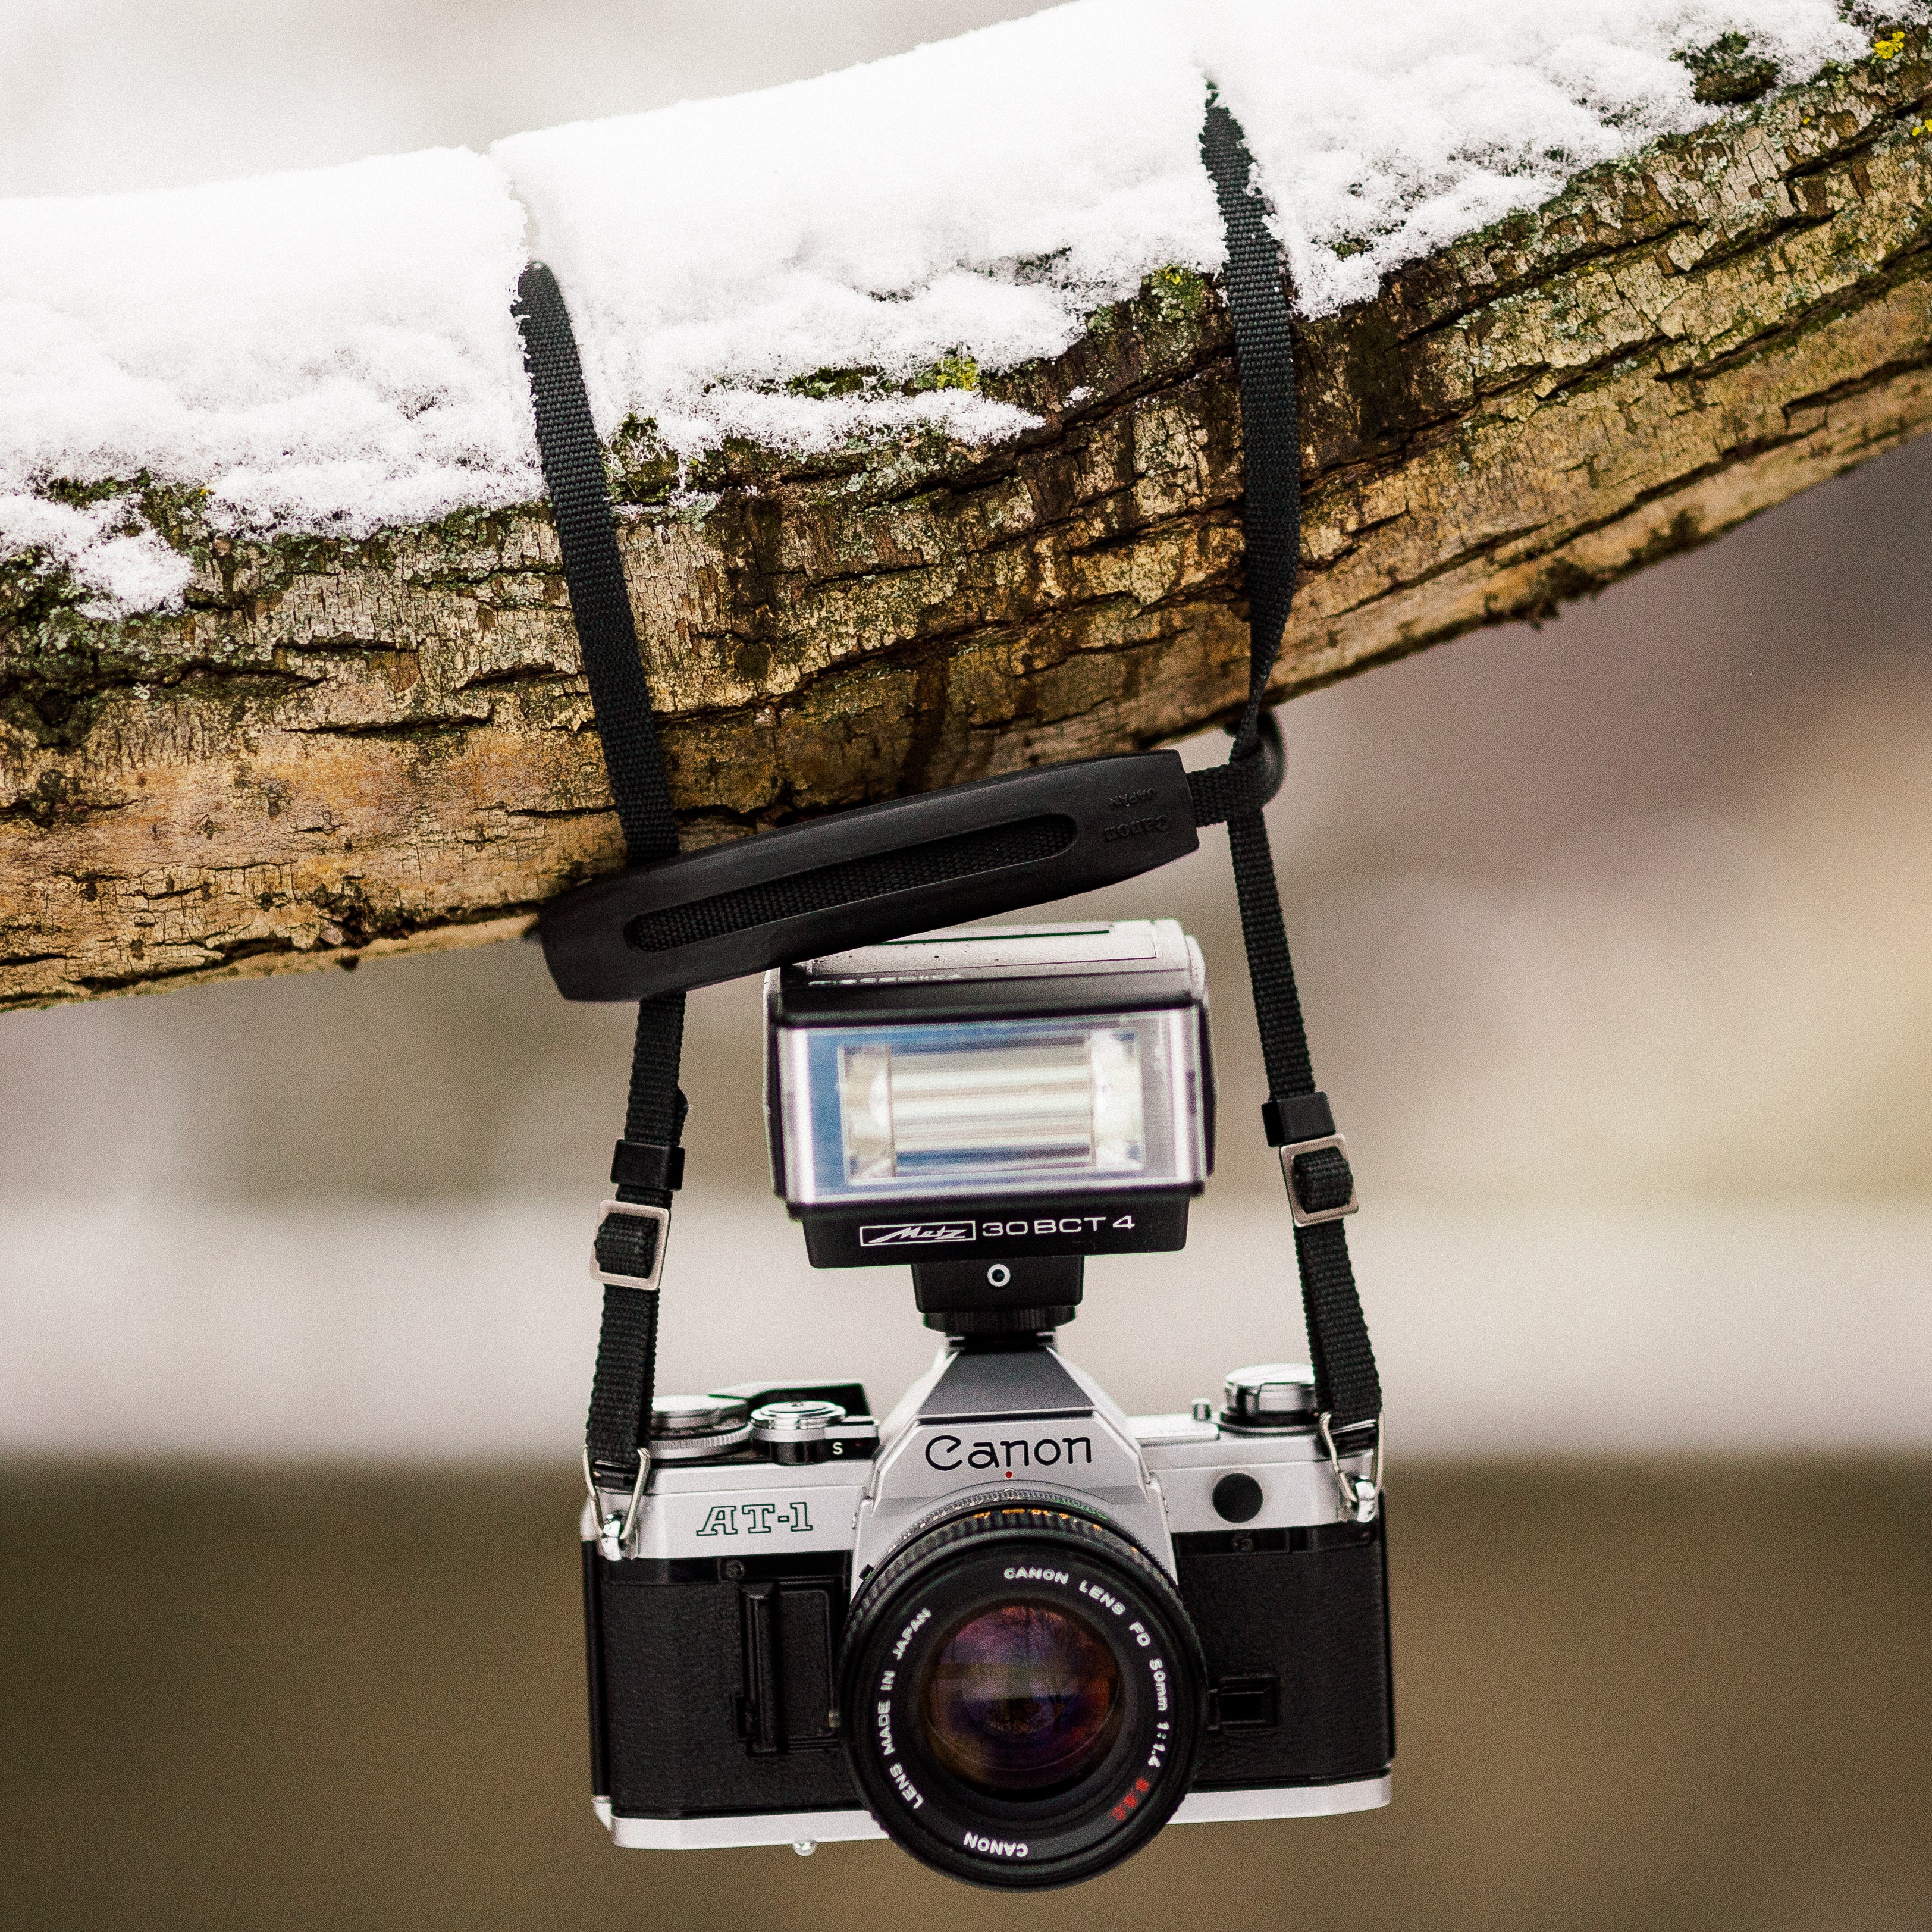 Black and gray canon dslr camera hanging on brown tree trunk with snow photo